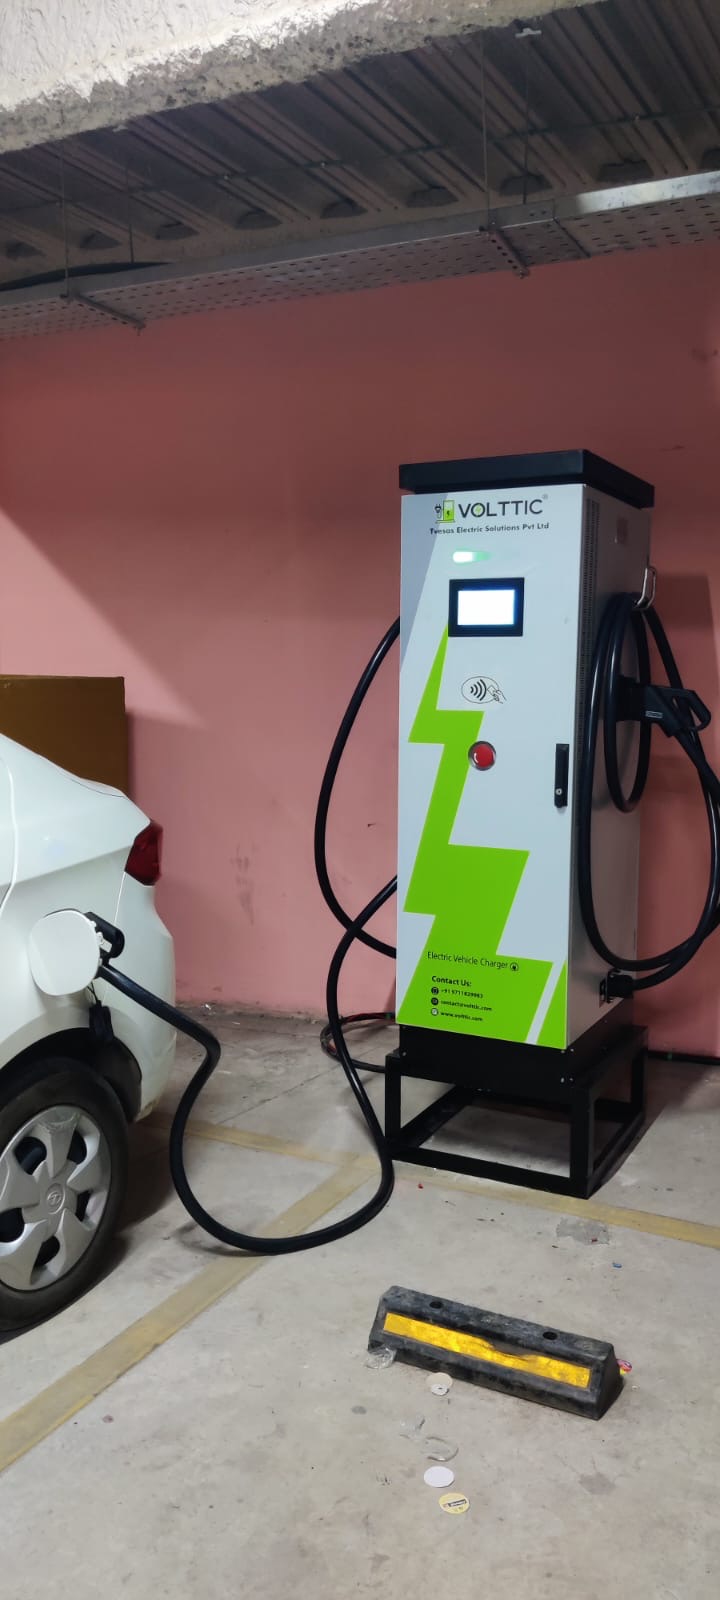 Volttic installed 60 KW CCS2 DC fast charger at Hyderabad